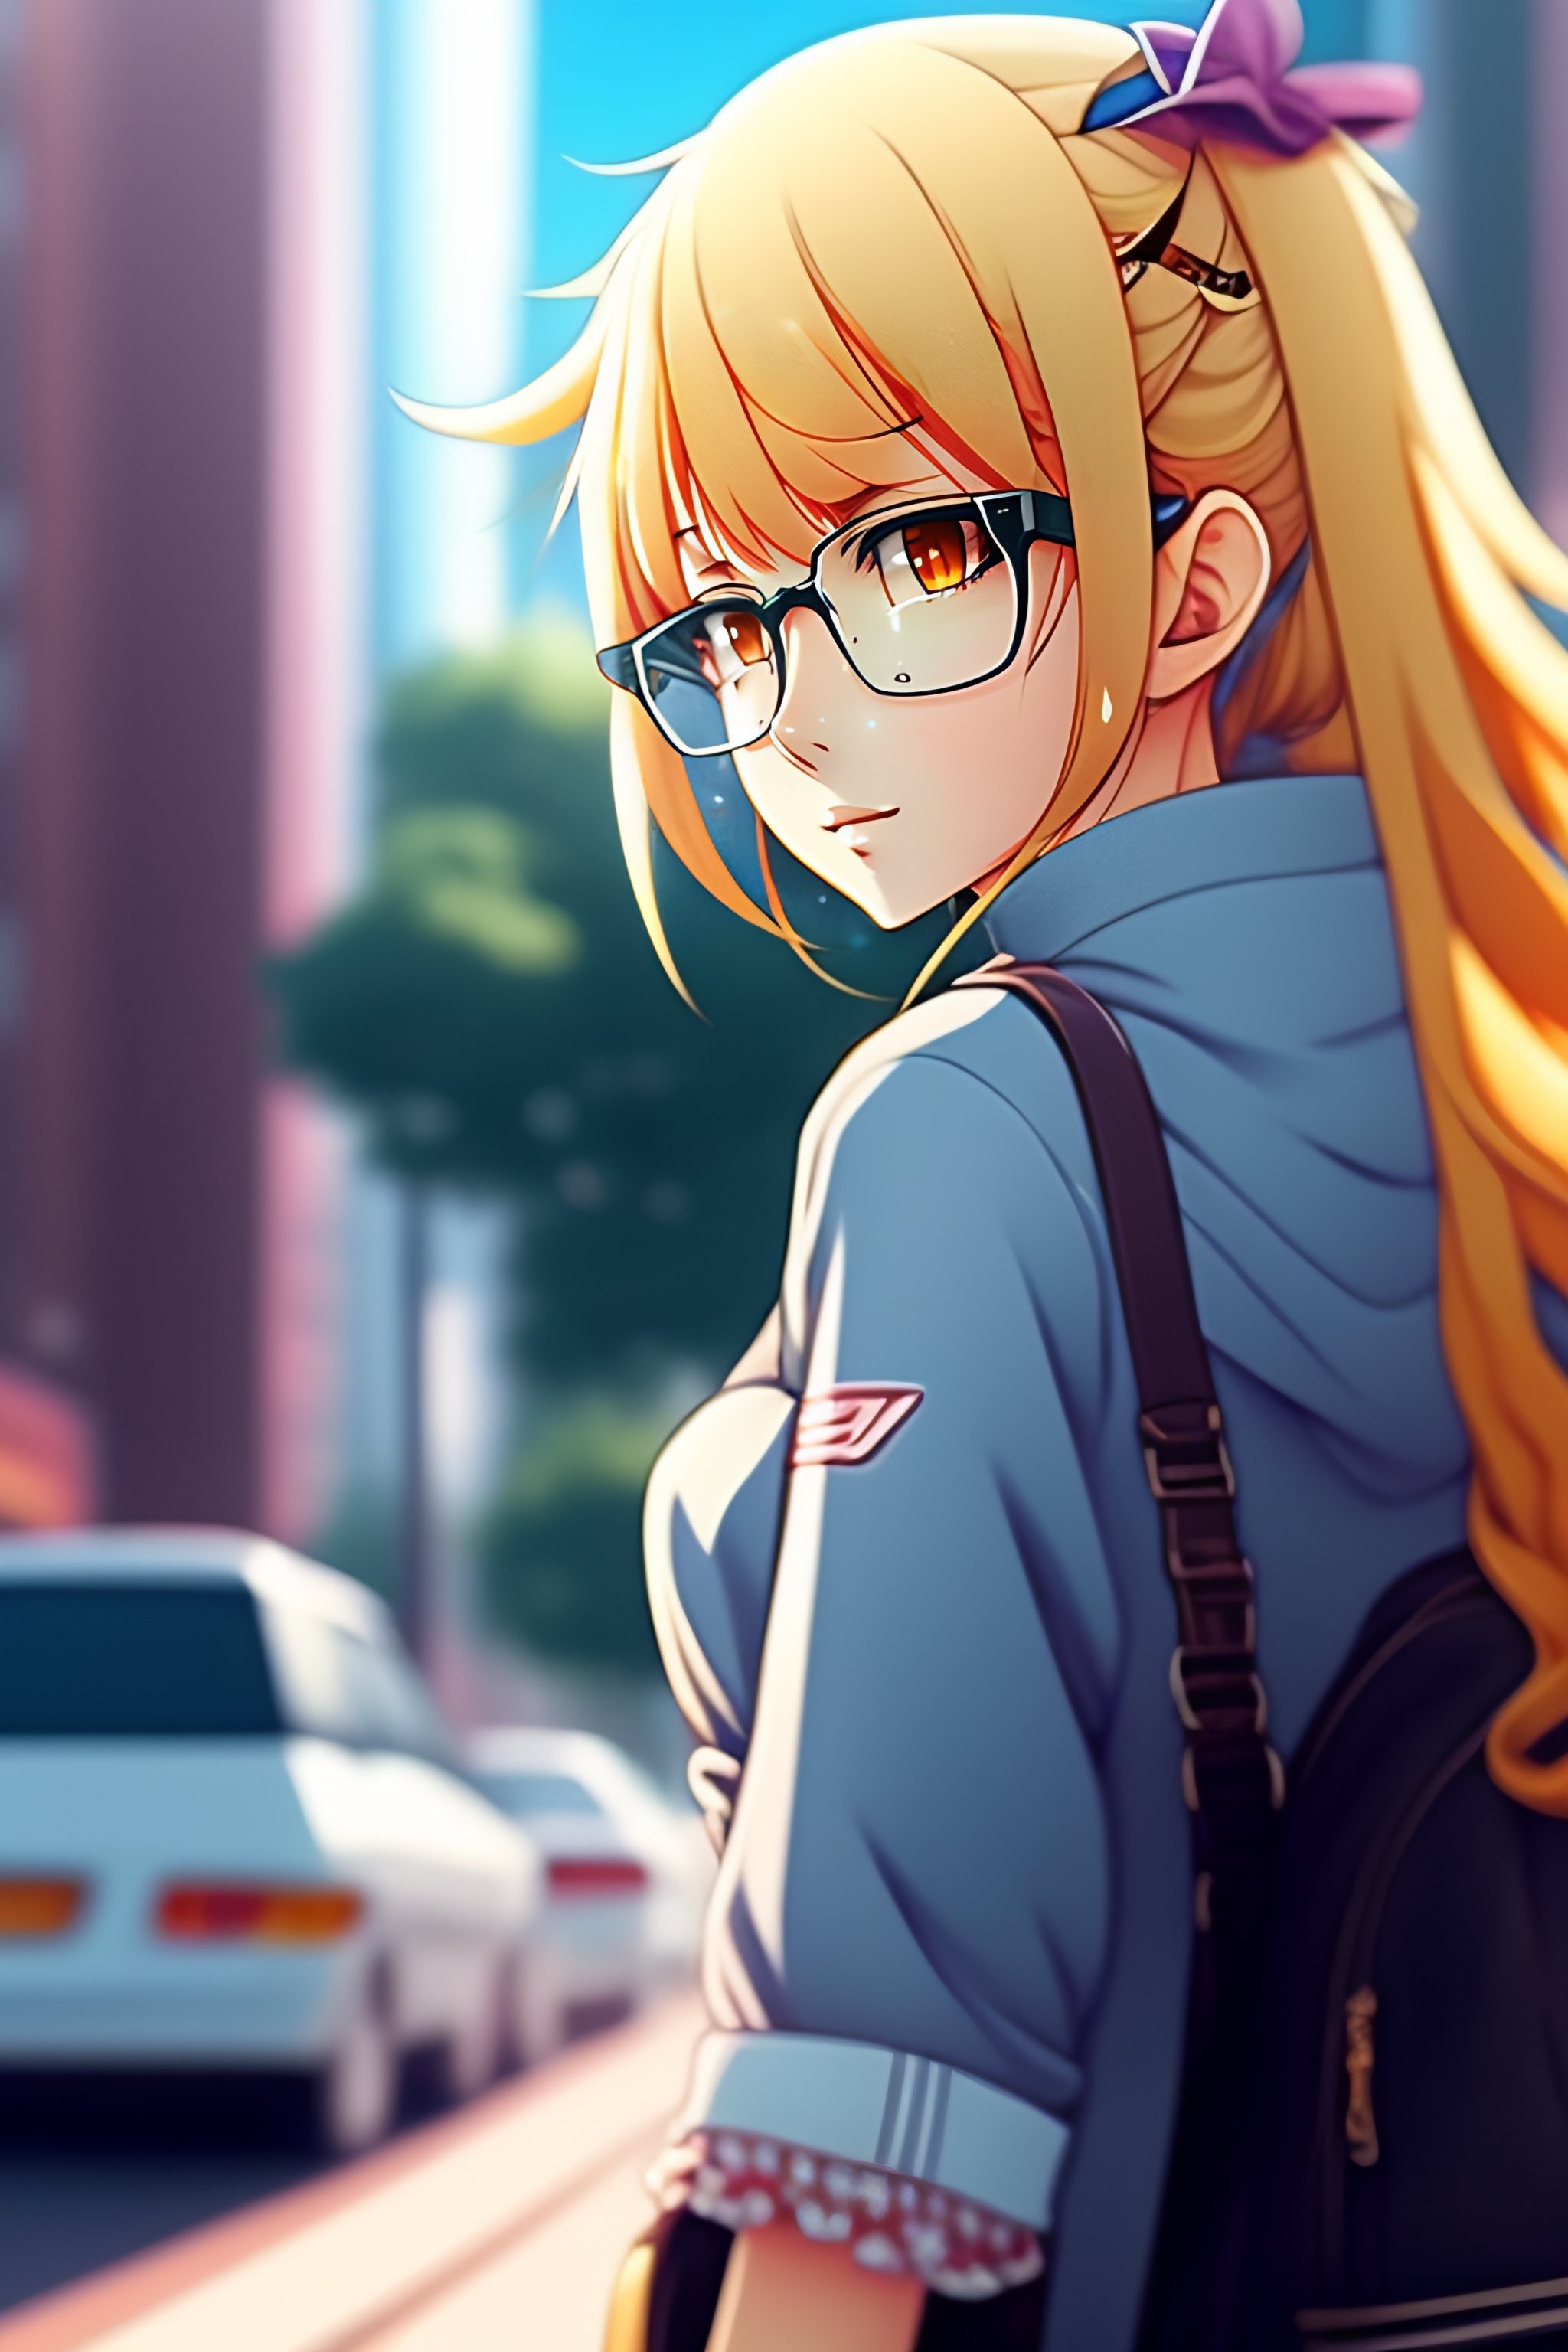 Lexica A Blonde Girl With Glasses Leaning Forward Anime Style Anime Japanese Street Evangelion 0618